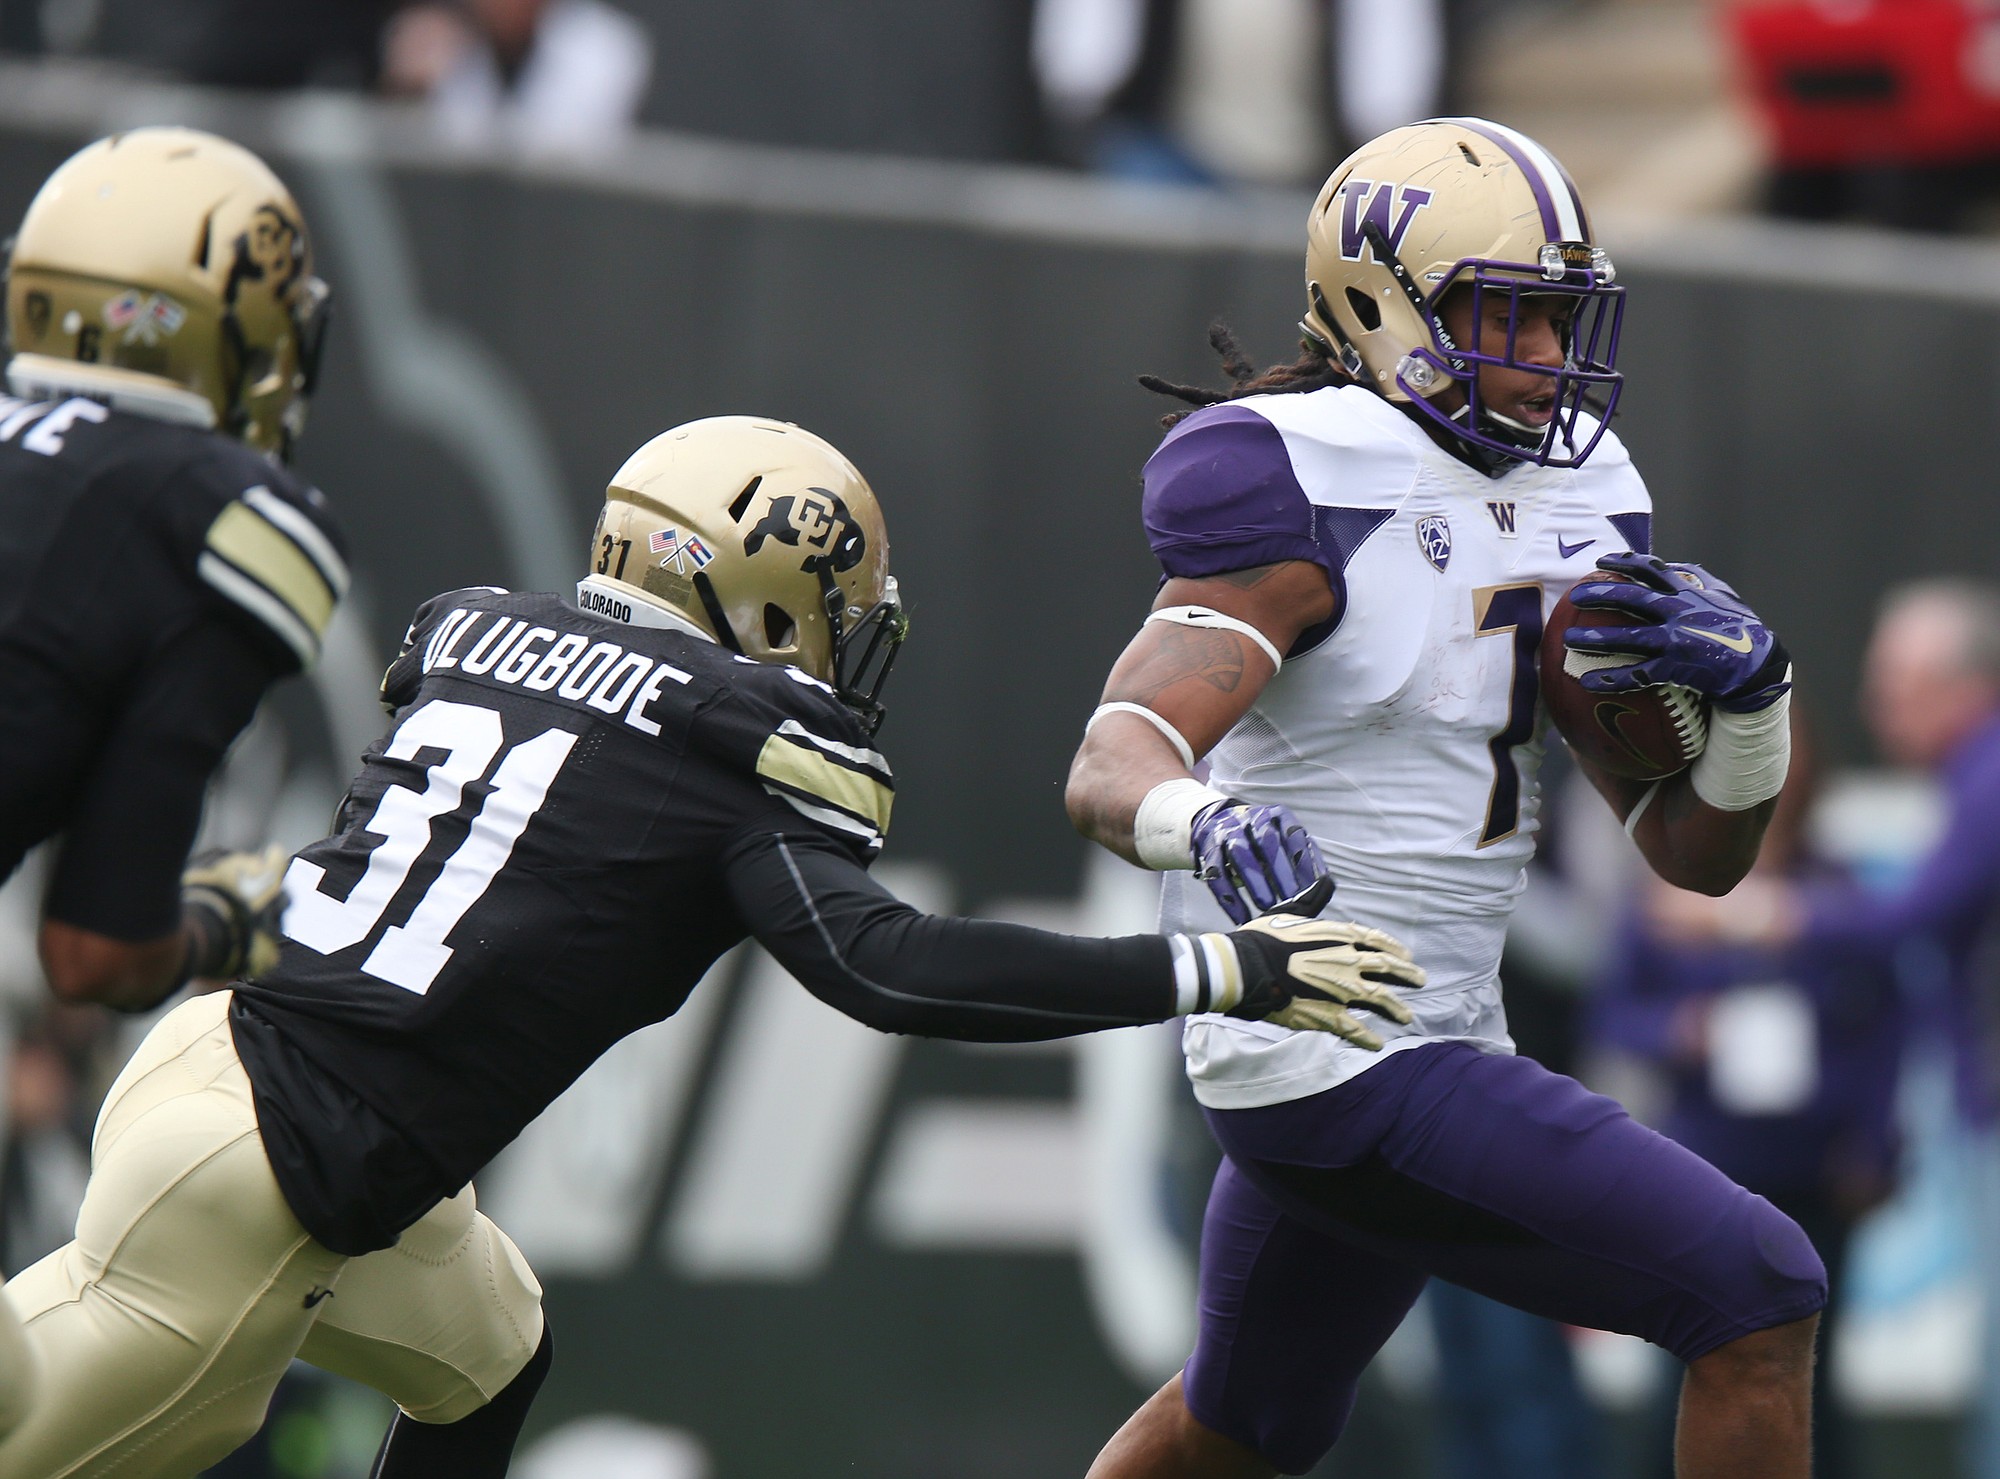 Washington runing back Shaq Thompson, right, eludes tackle by Colorado linebacker Kenneth Olugbode in the second quarter of an NCAA college football game in Boulder, Colo., on Saturday, Nov.